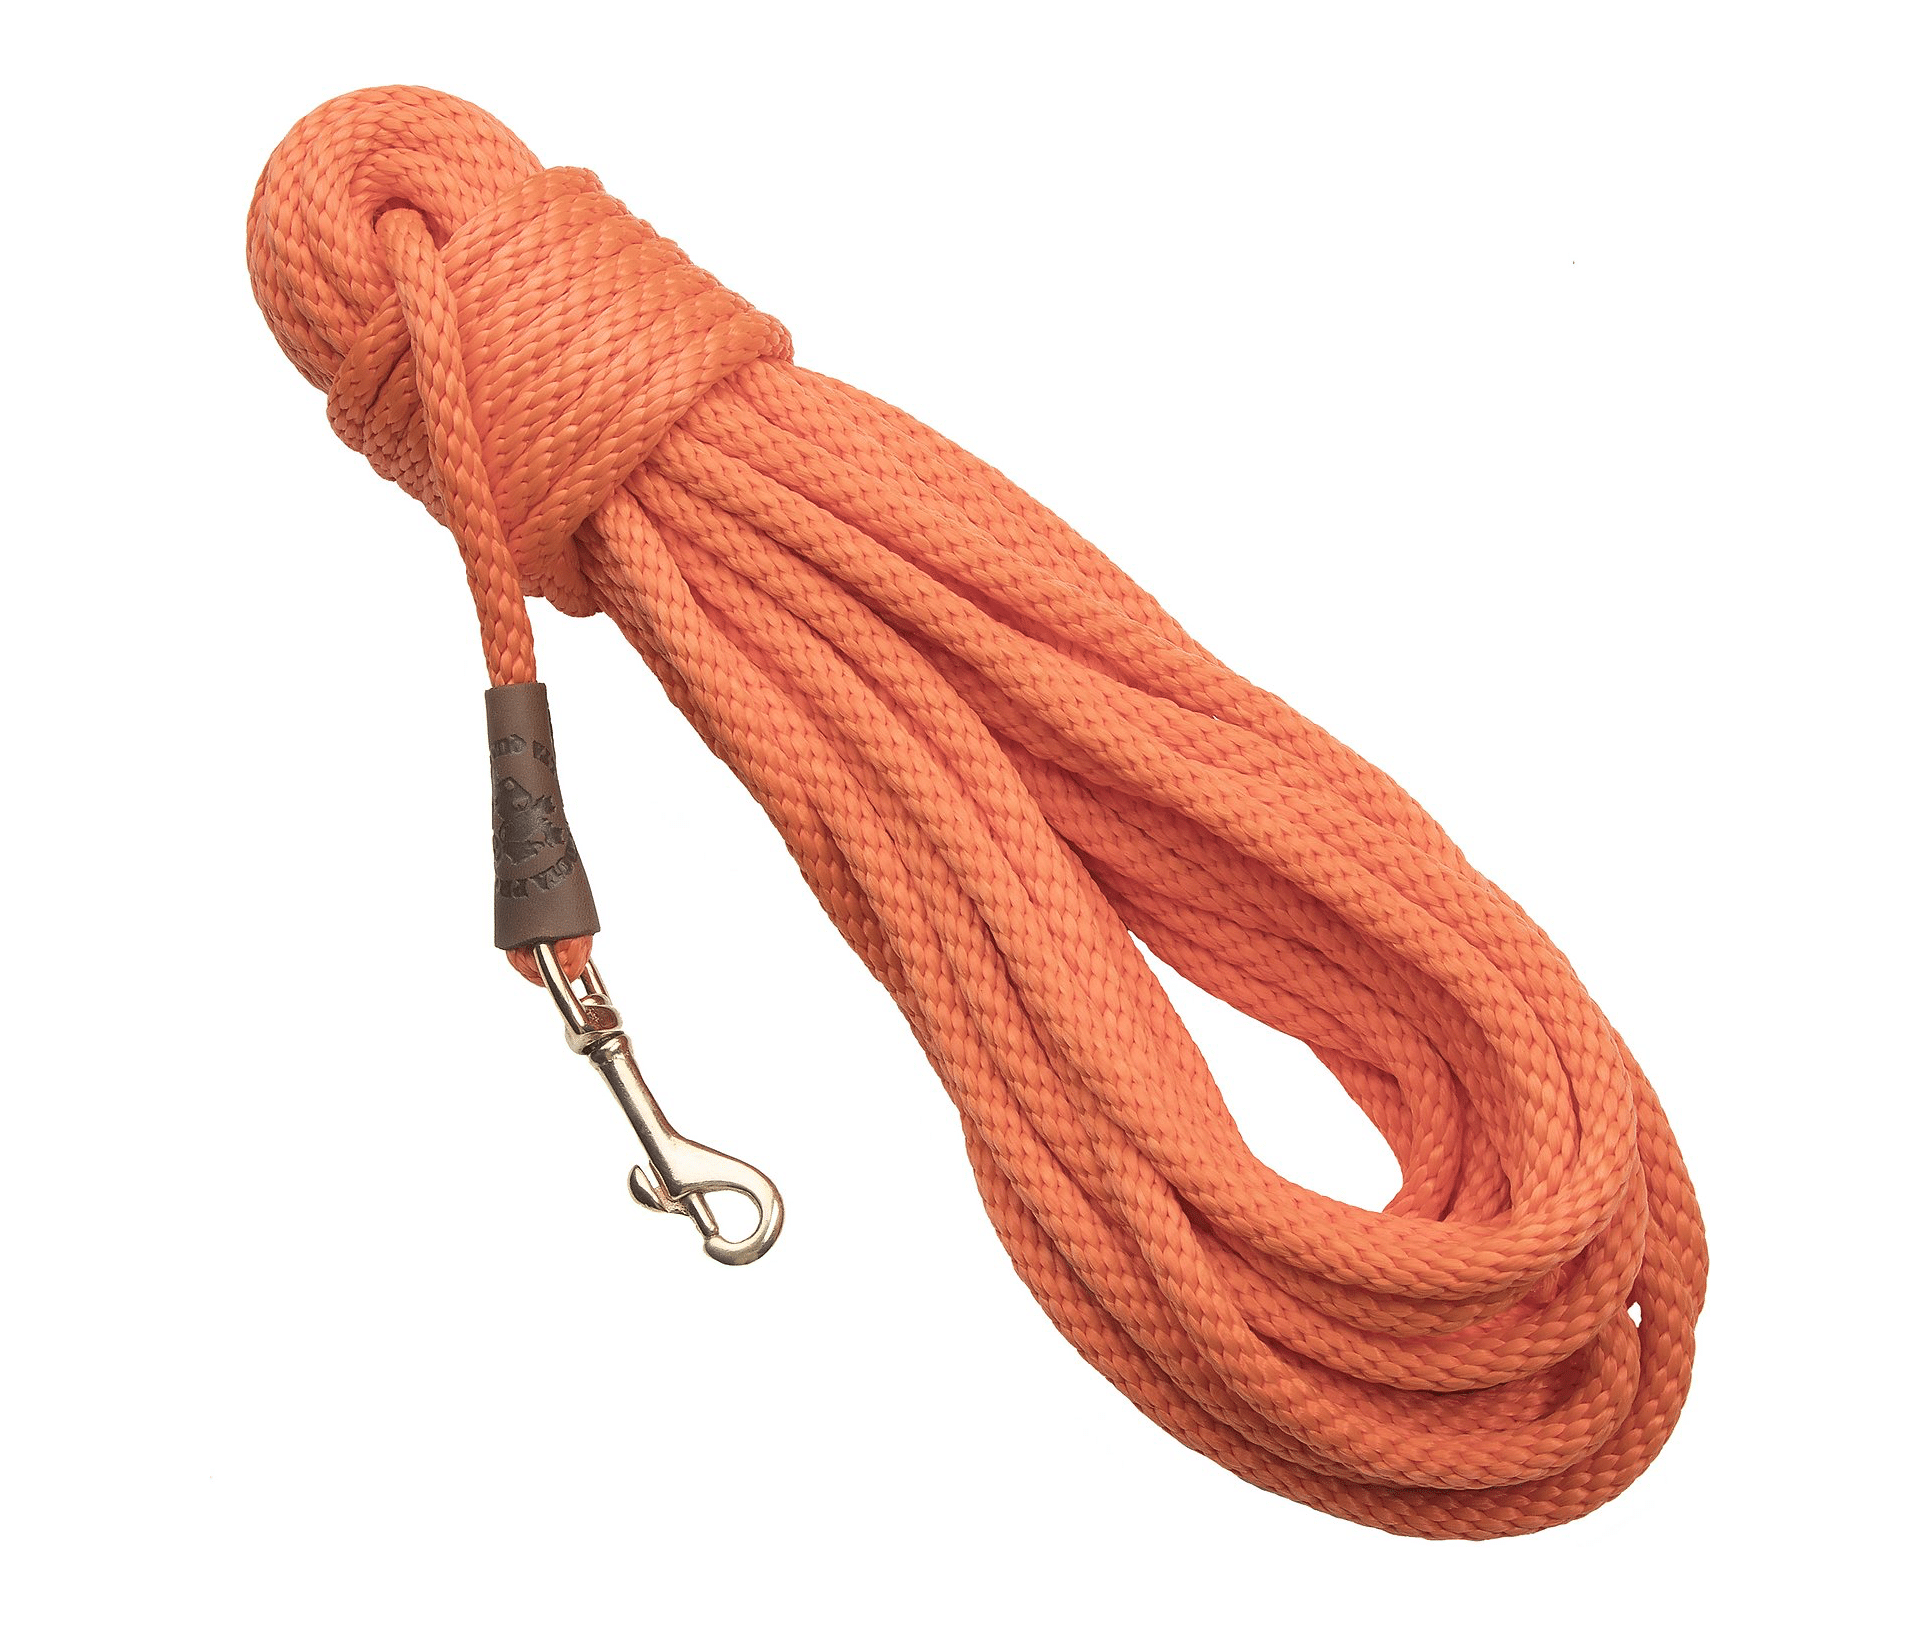 The Mendota Products Trainer Check Cord Dog Lead